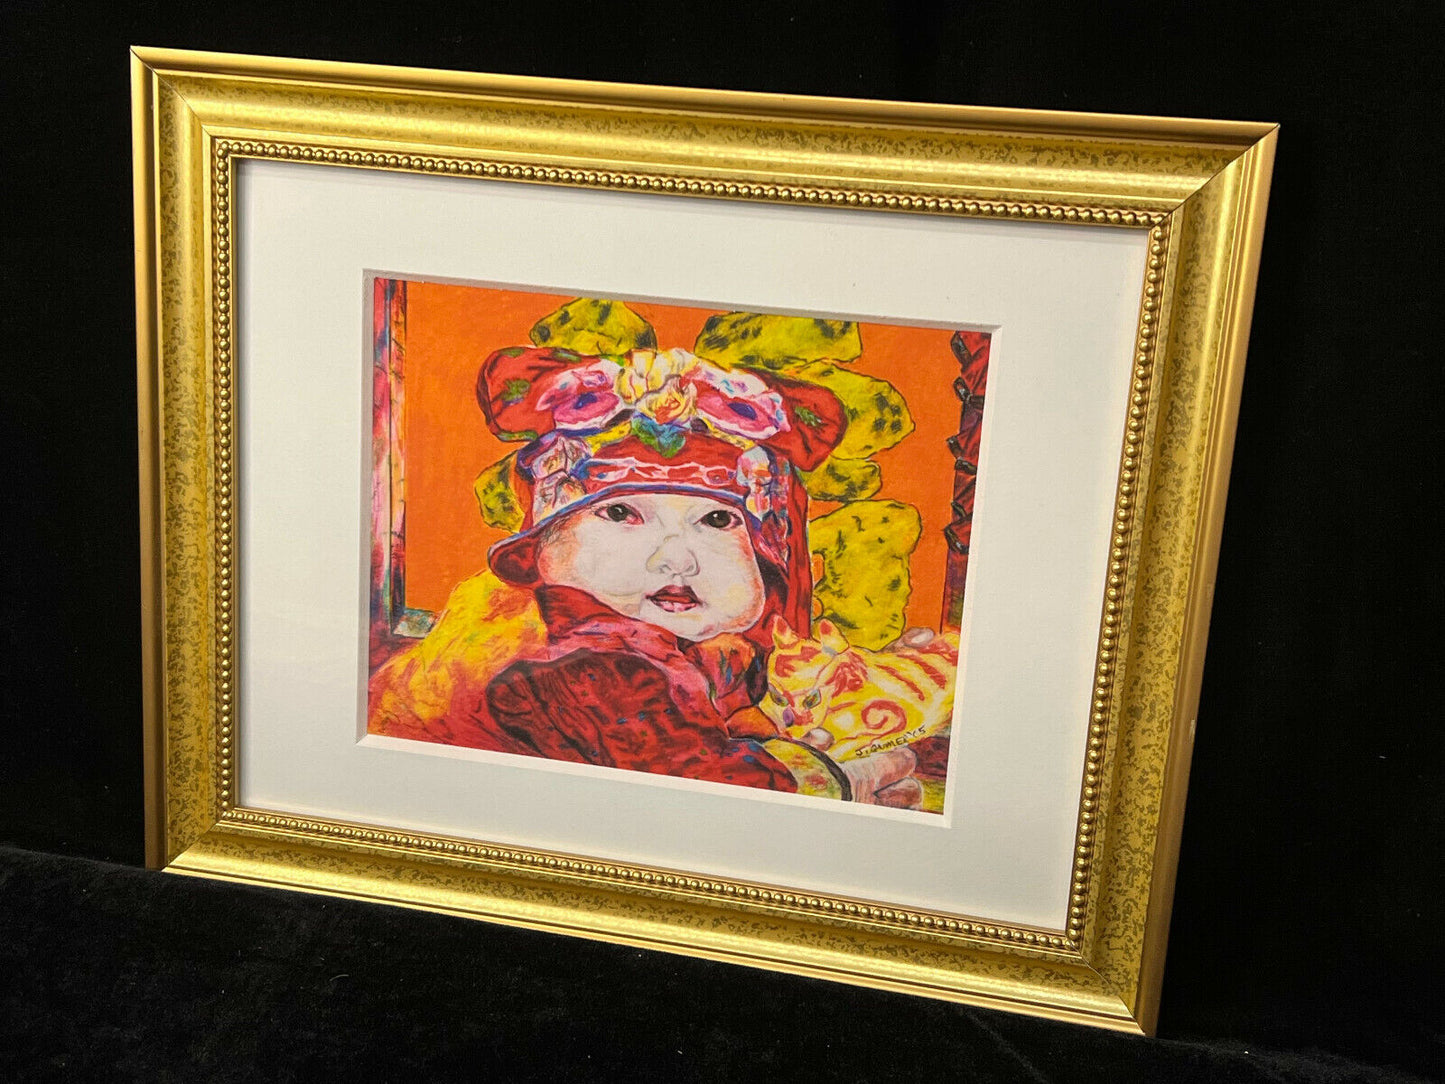 Framed Print of Baby with Colorful Bows by J. Gumer 16.5" x 13.5" Framed